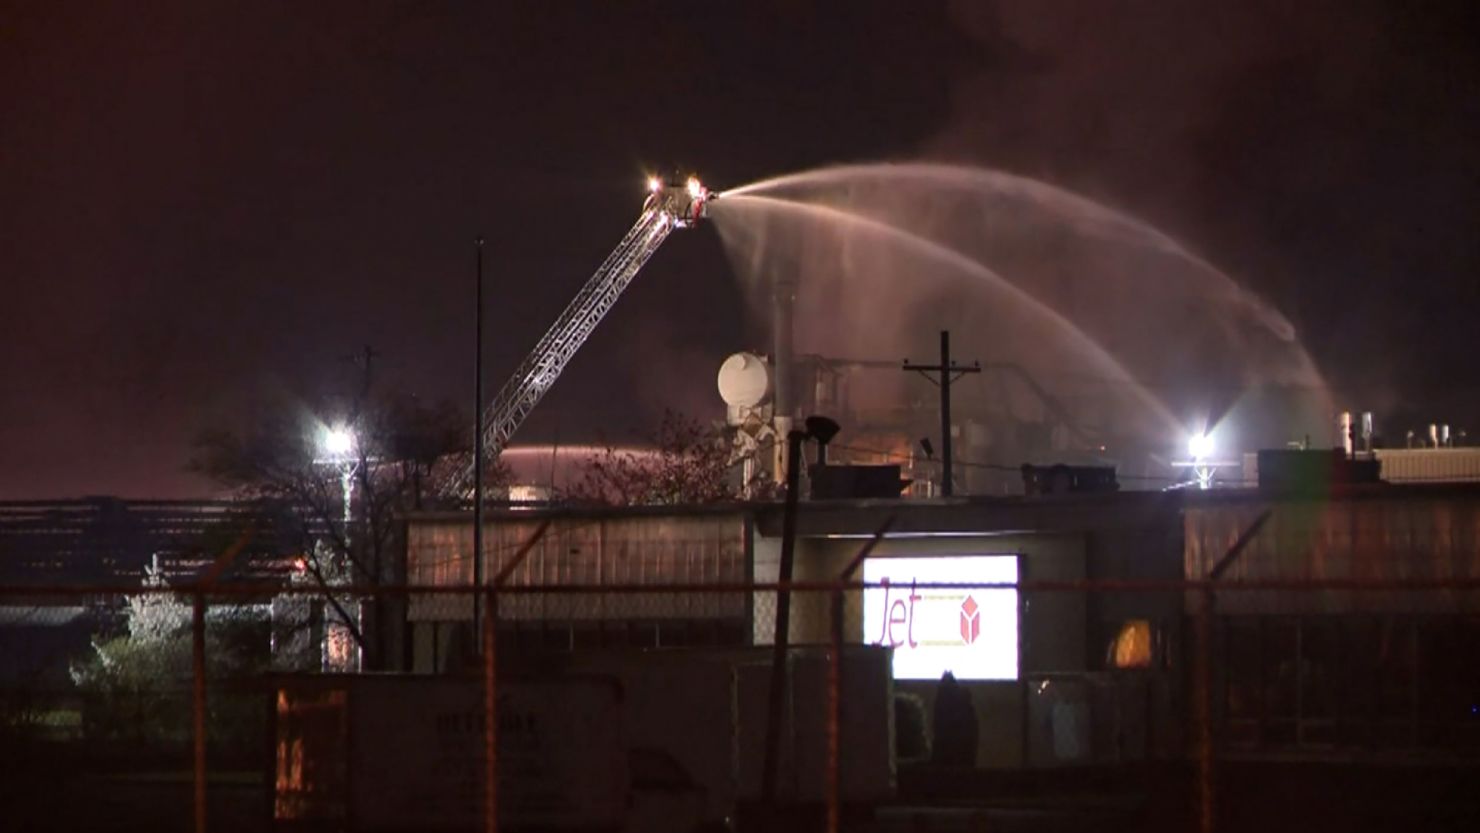 The Columbus Division of Fire said it received a report of an explosion at the plant shortly after midnight.